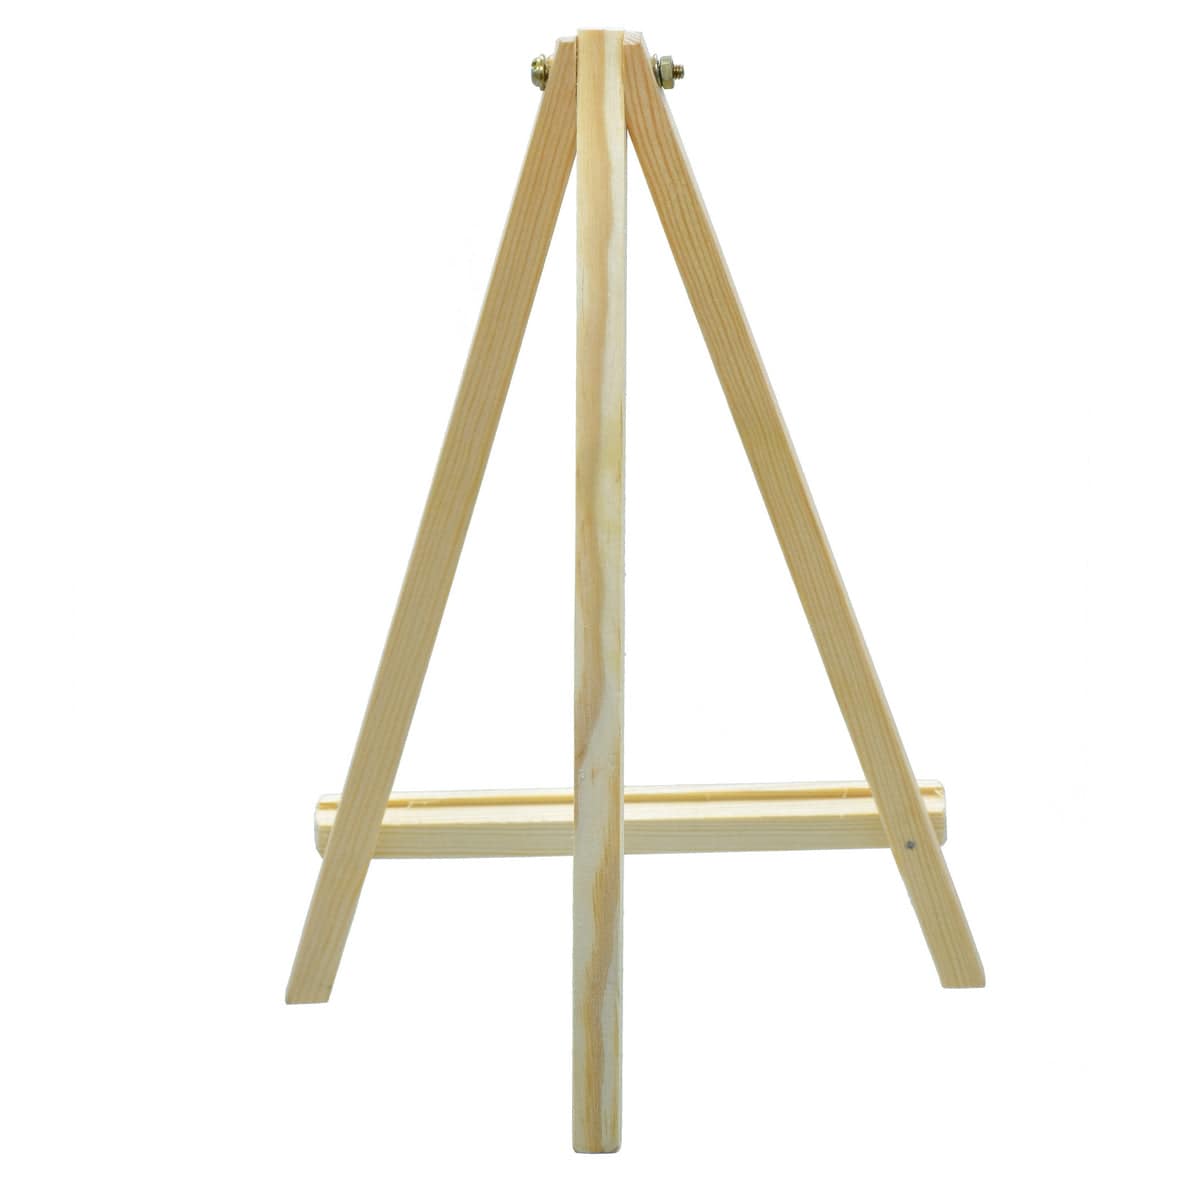 jags-mumbai Easel Wooden Easel Stand(10-inch)